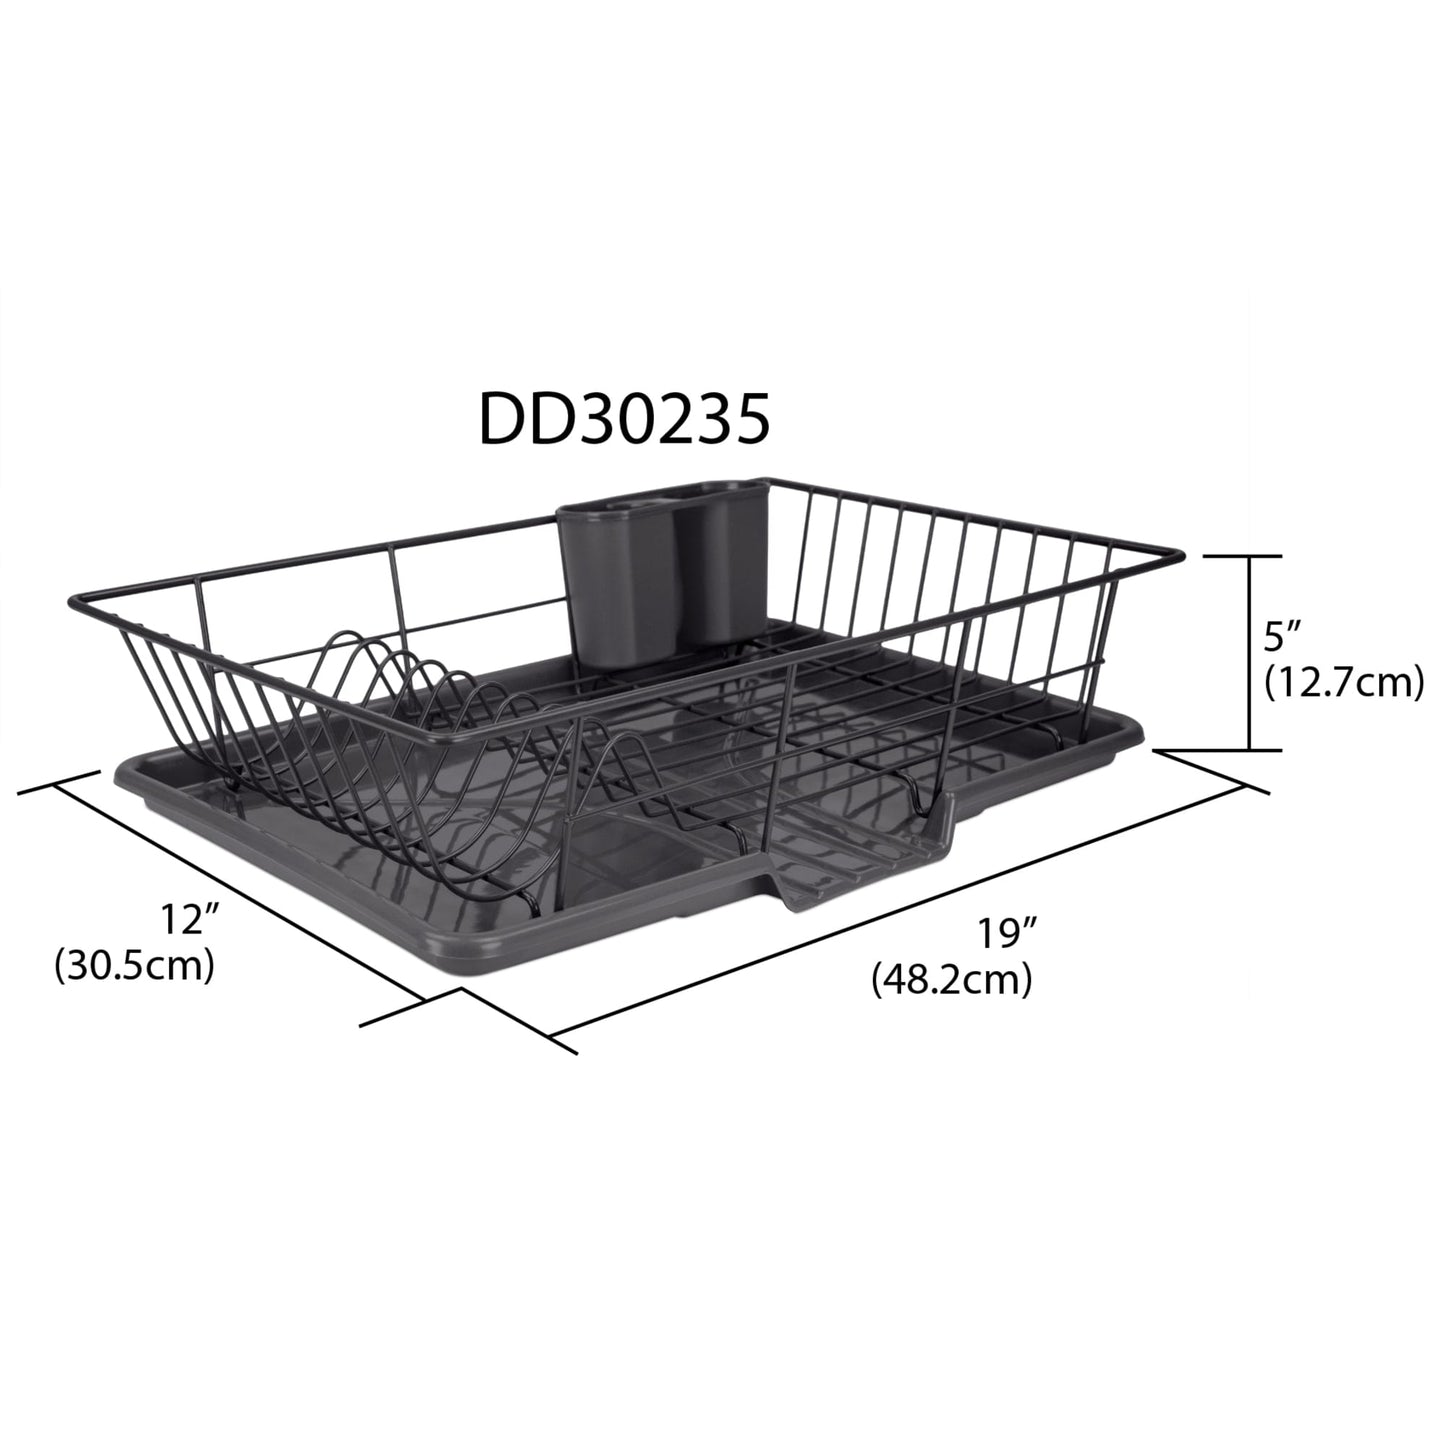 3 Piece Rust-Resistant Vinyl Dish Drainer with Self-Draining Drip Tray, Black